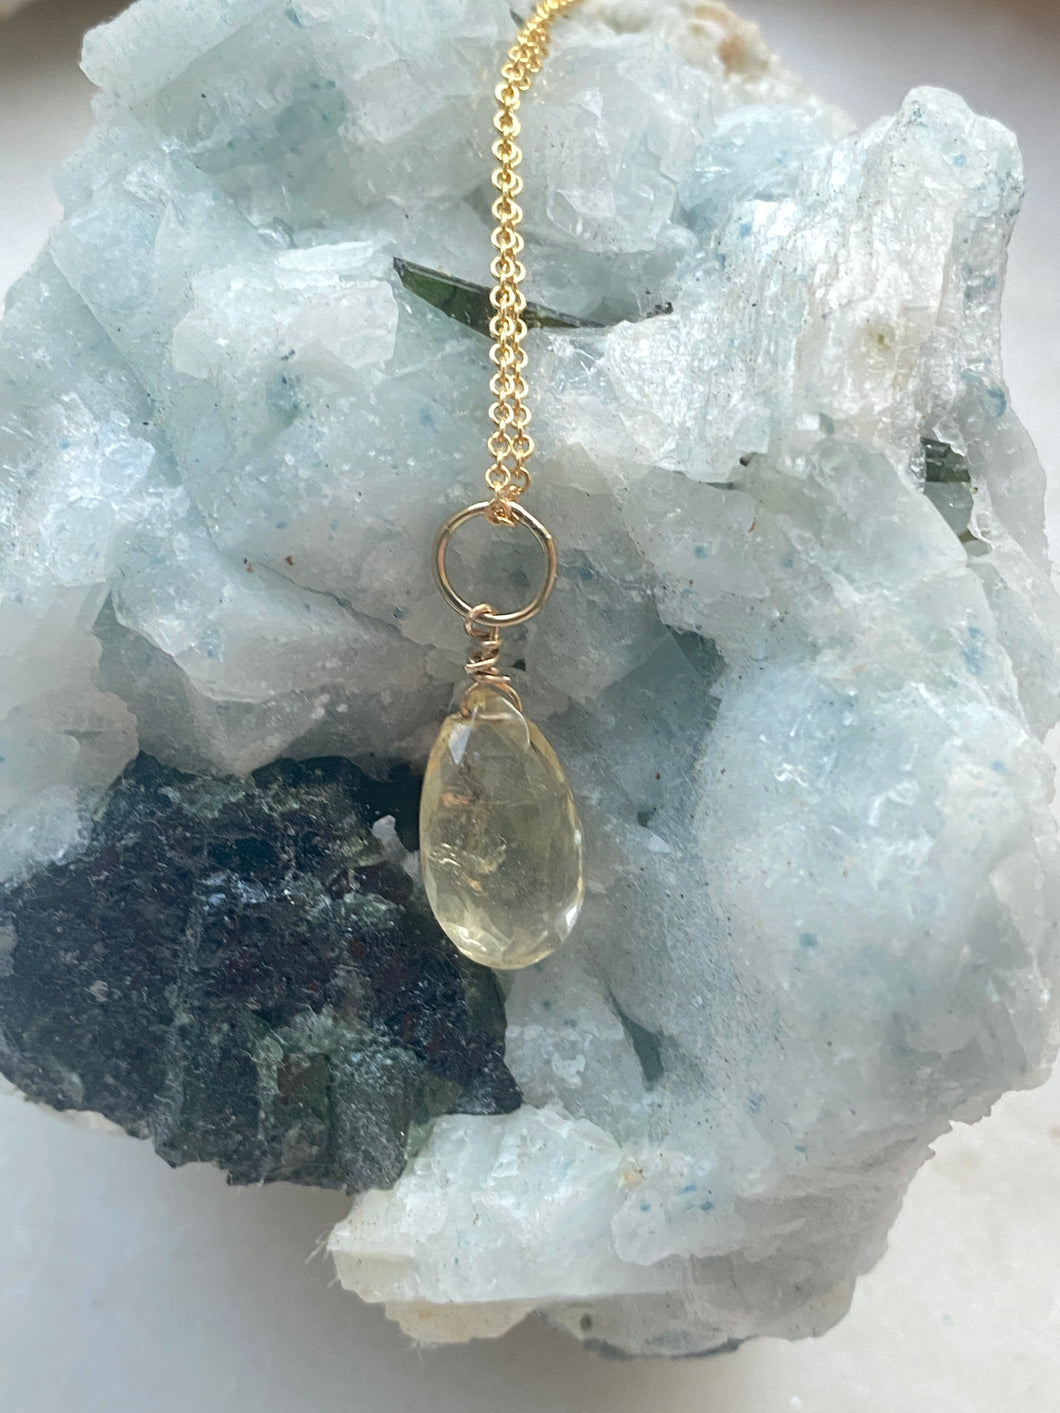 Citrine Goldfilled Necklace by Full Moon Designs. Hand crafted.